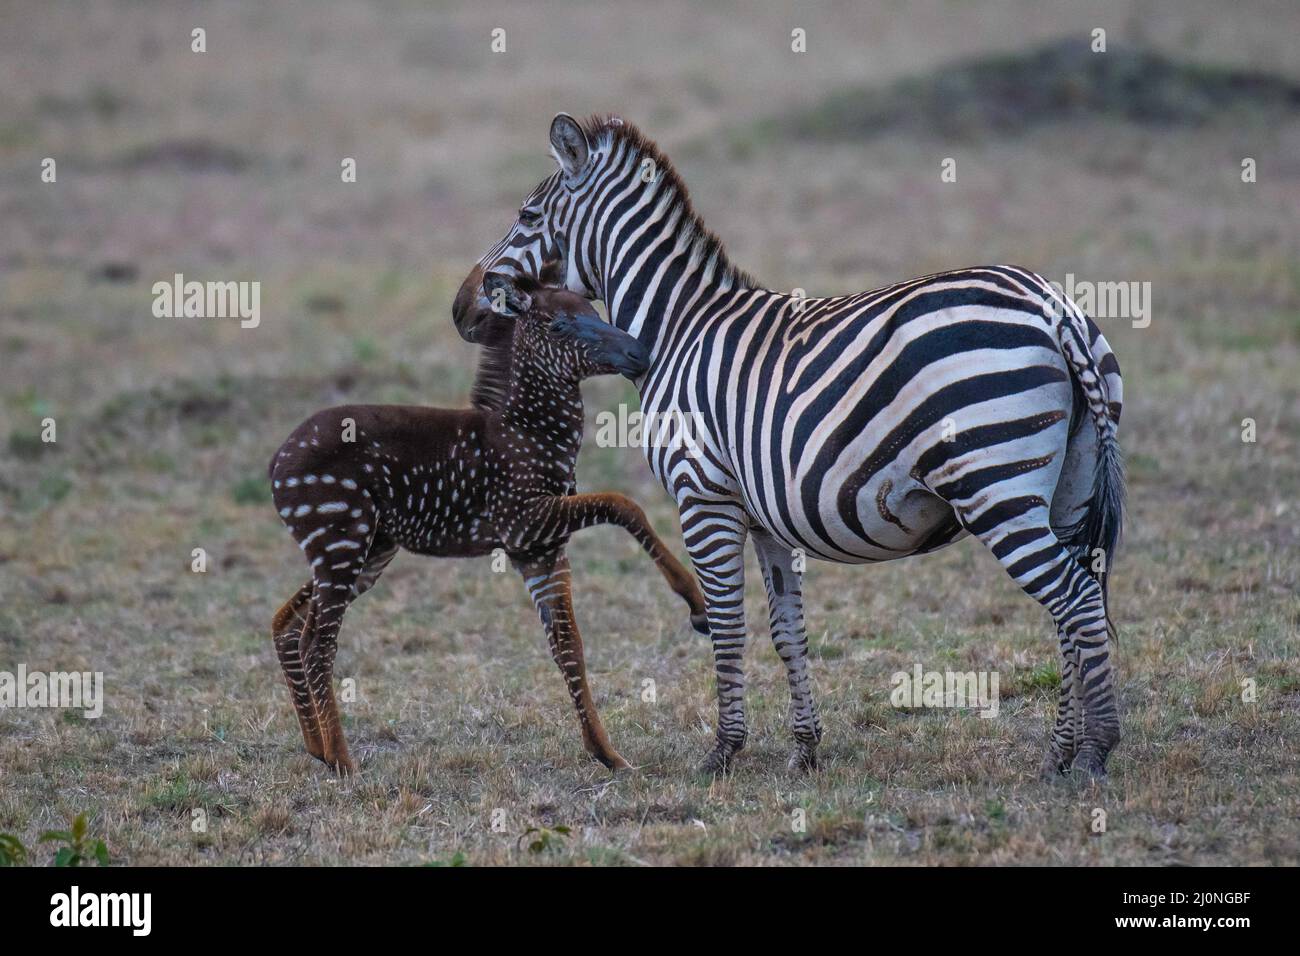 Exchanging stripes for spots, this unique zebra foal was born with a rare condition called pseudomelanism that is affecting his coat appearance. Stock Photo